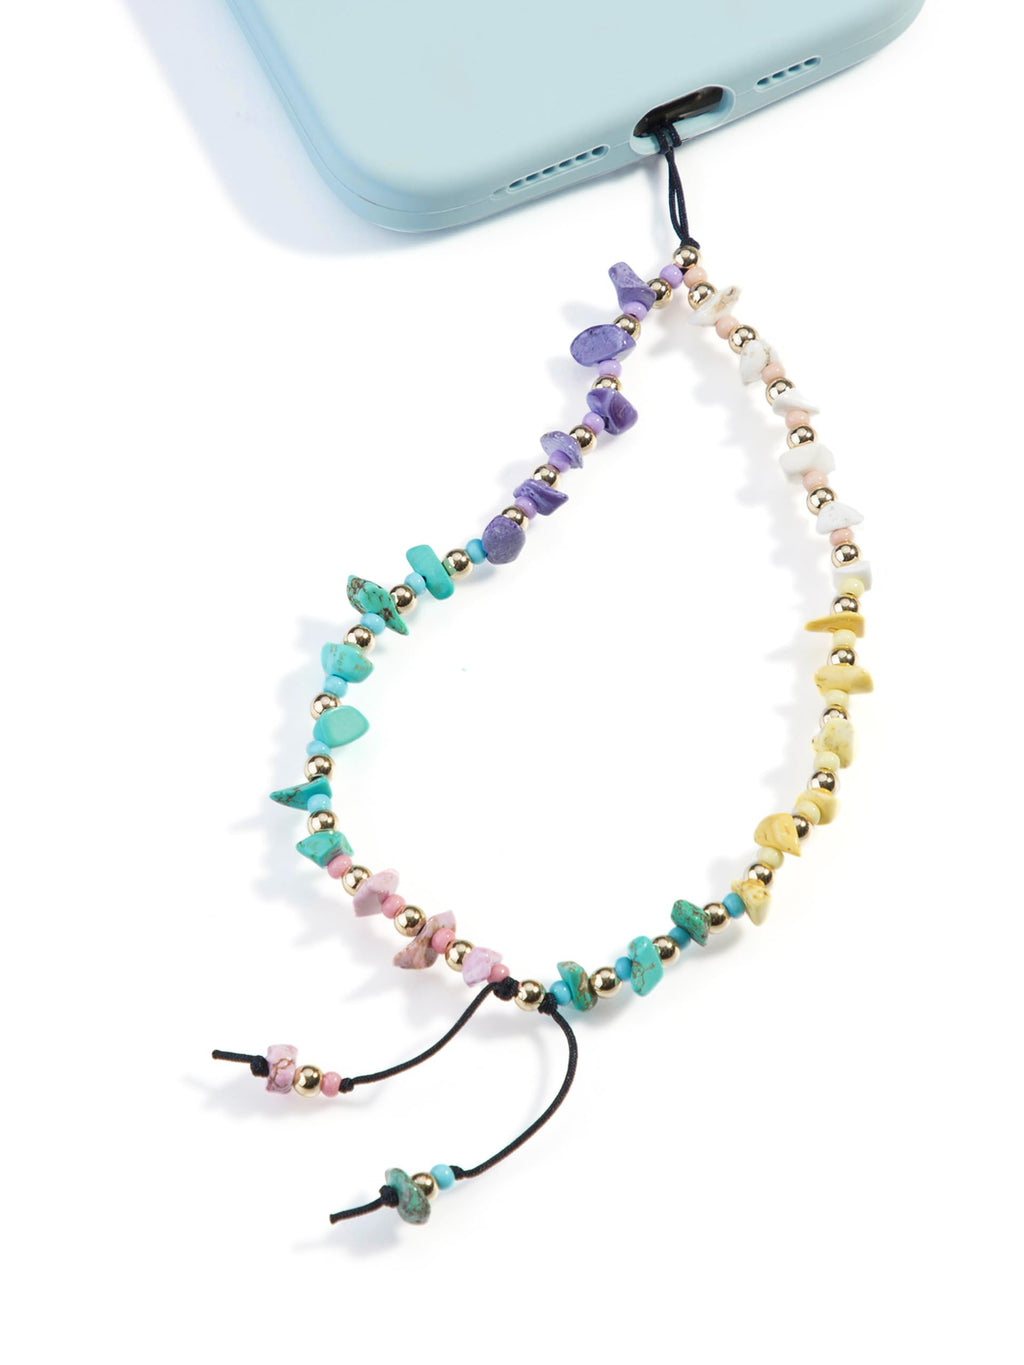 Aesthetic Phone Charm - Natural Quartz & Miyuki Seed Beads Phone Chain Strap - Durable, Versatile, & Stylish Phone Wrist Strap for Personal Items Colorful2